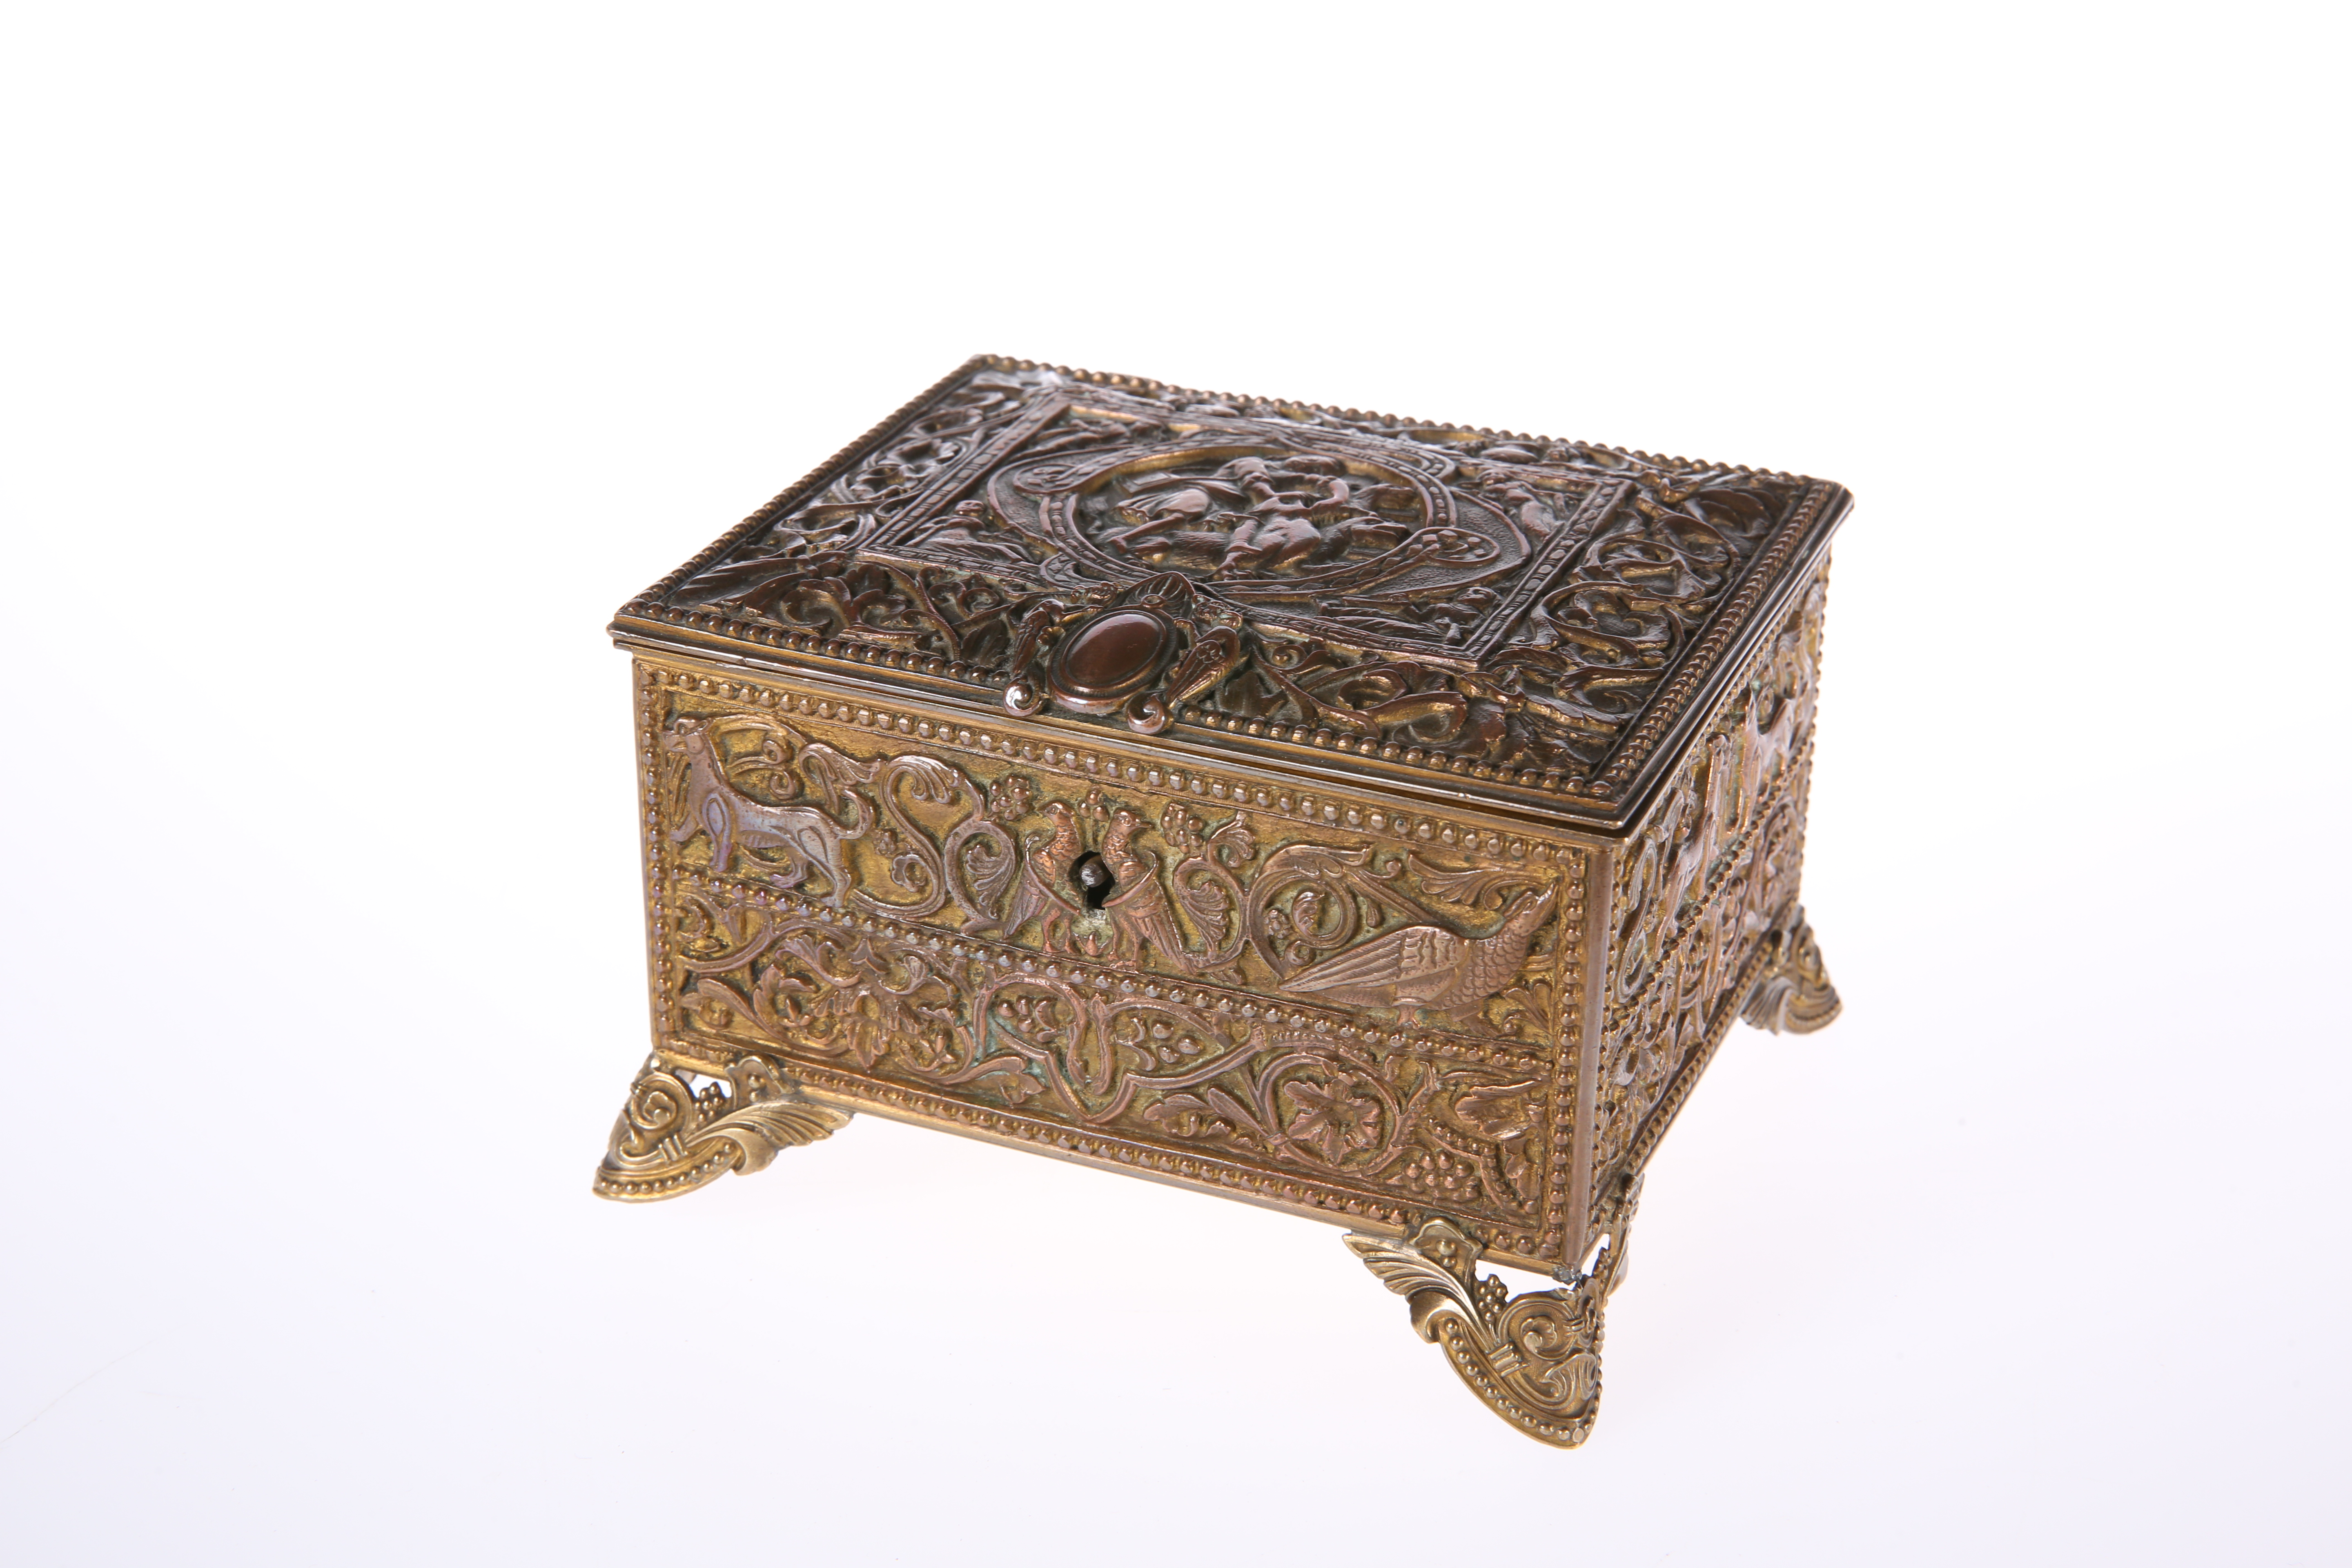 A LATE 19TH CENTURY FRENCH CAST METAL JEWEL CASKET